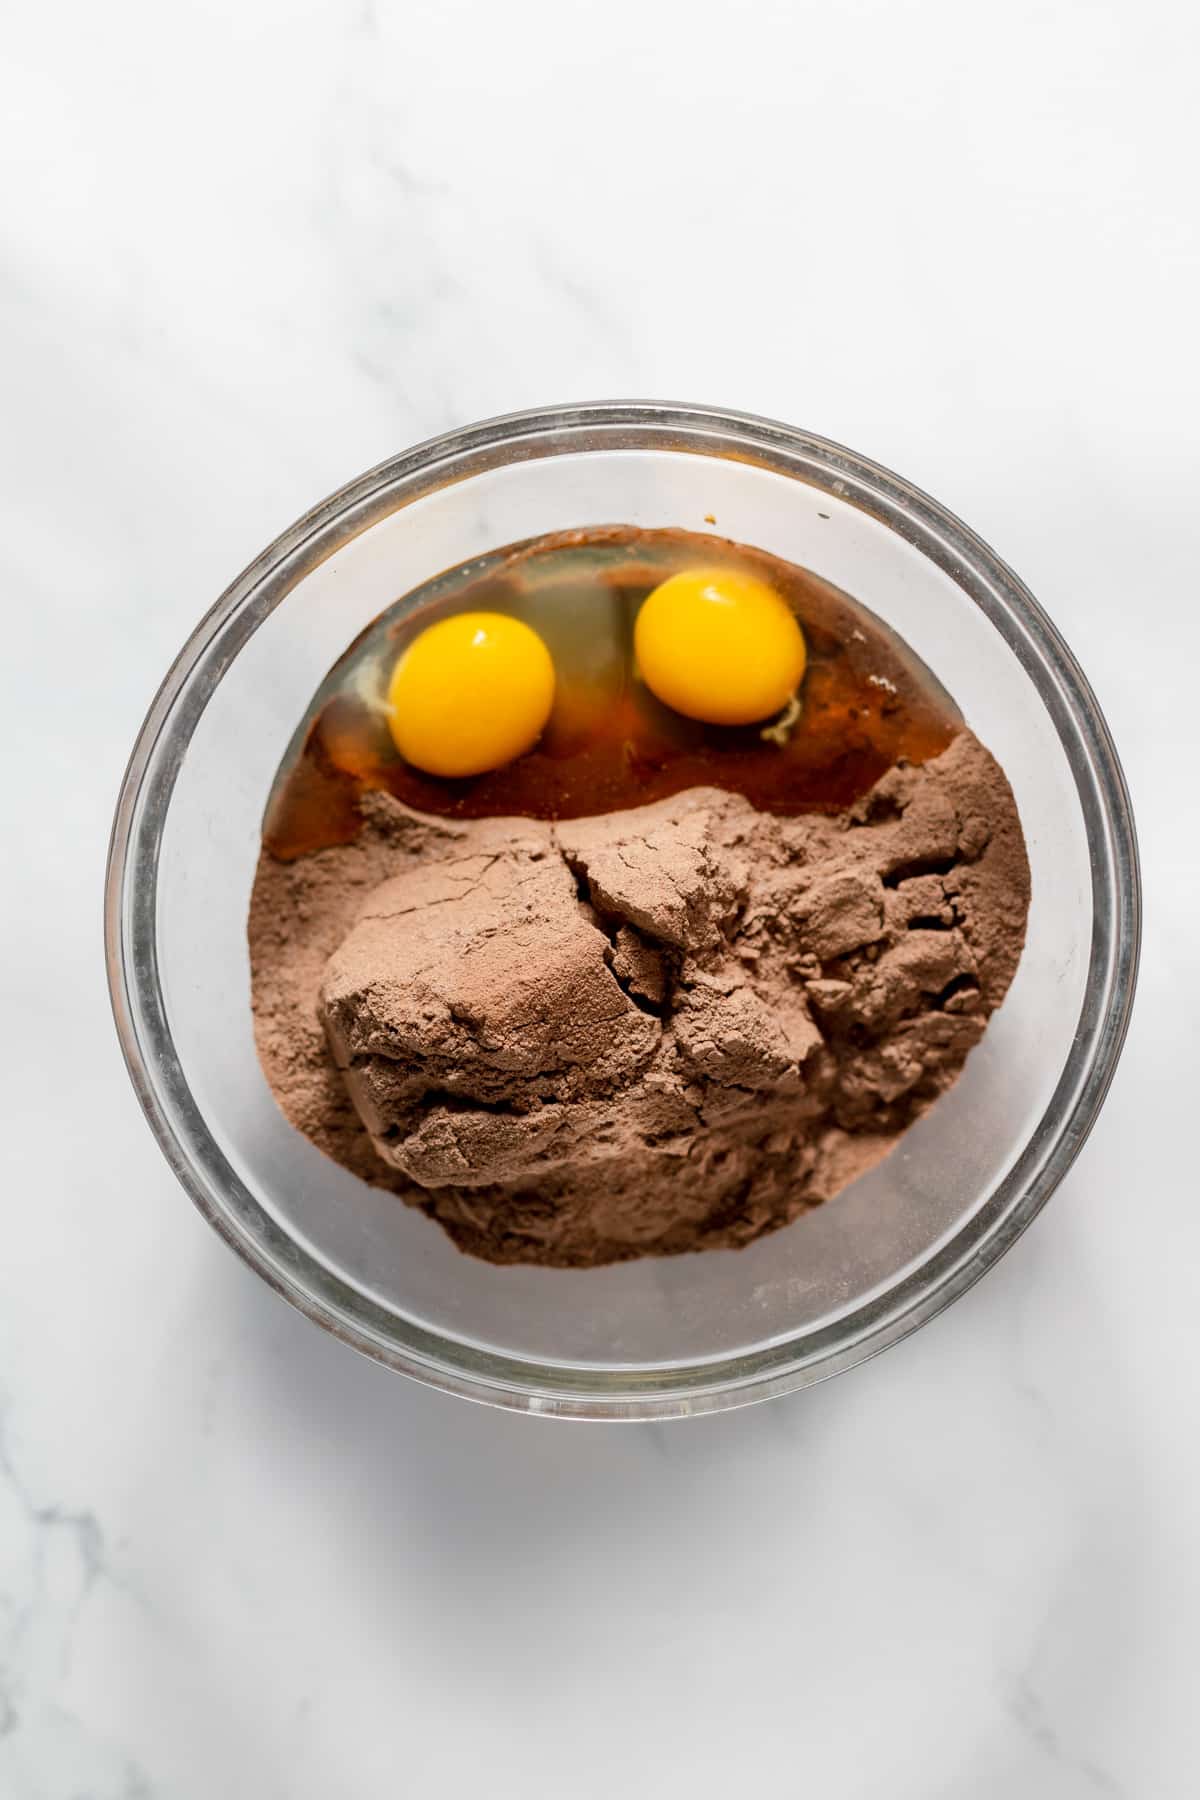 A bowl of brownie mix and 2 eggs before mixing together.